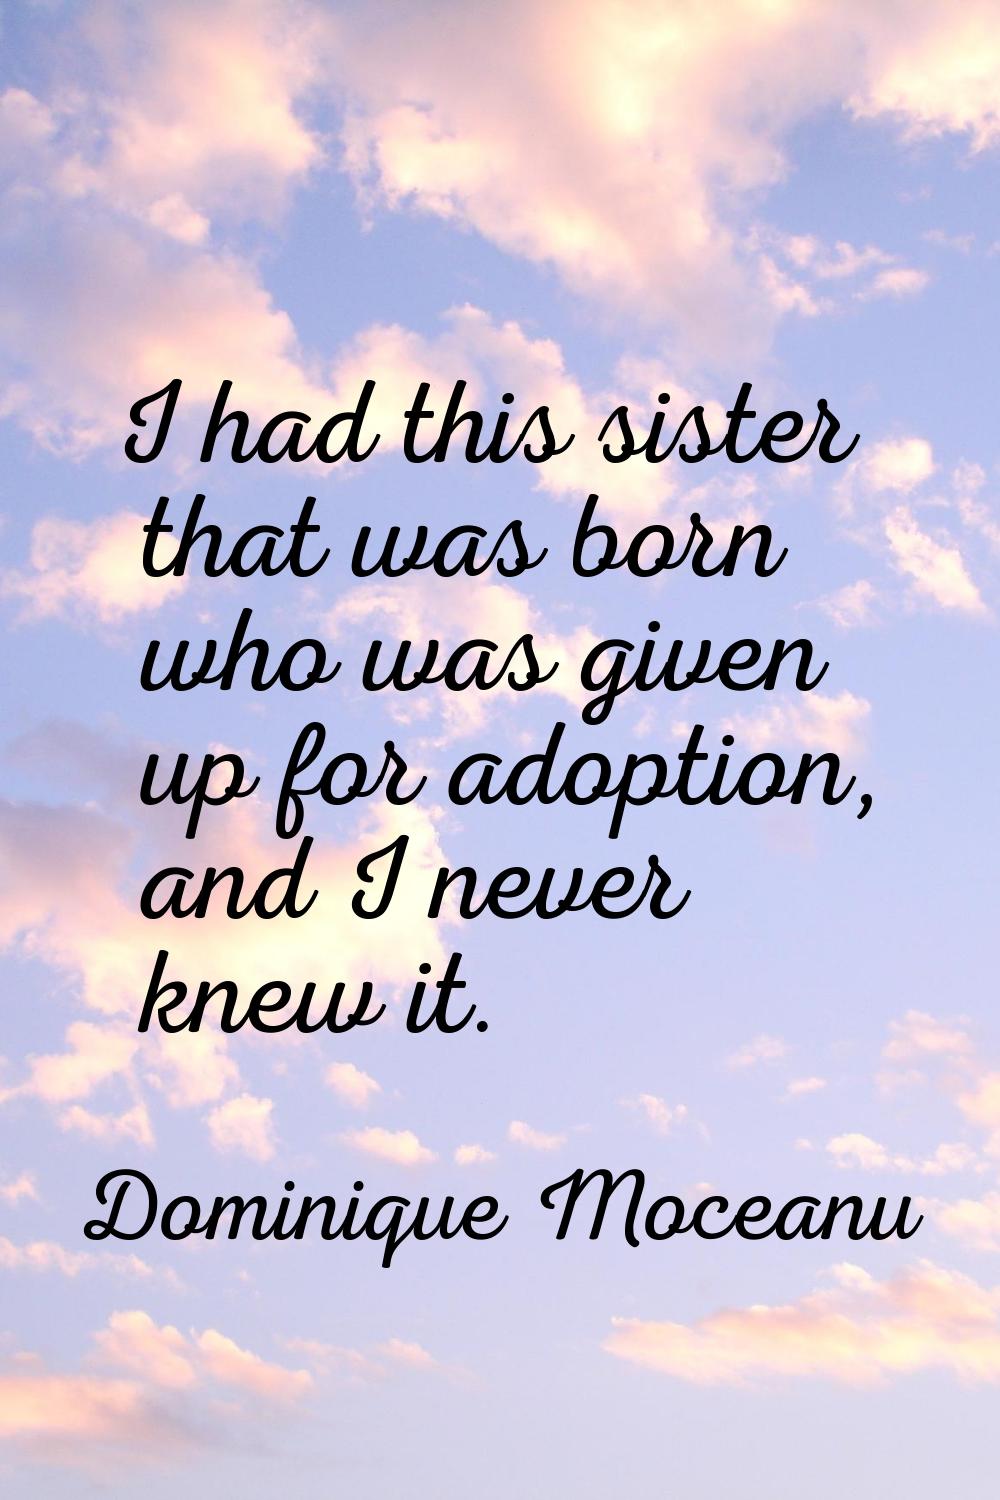 I had this sister that was born who was given up for adoption, and I never knew it.